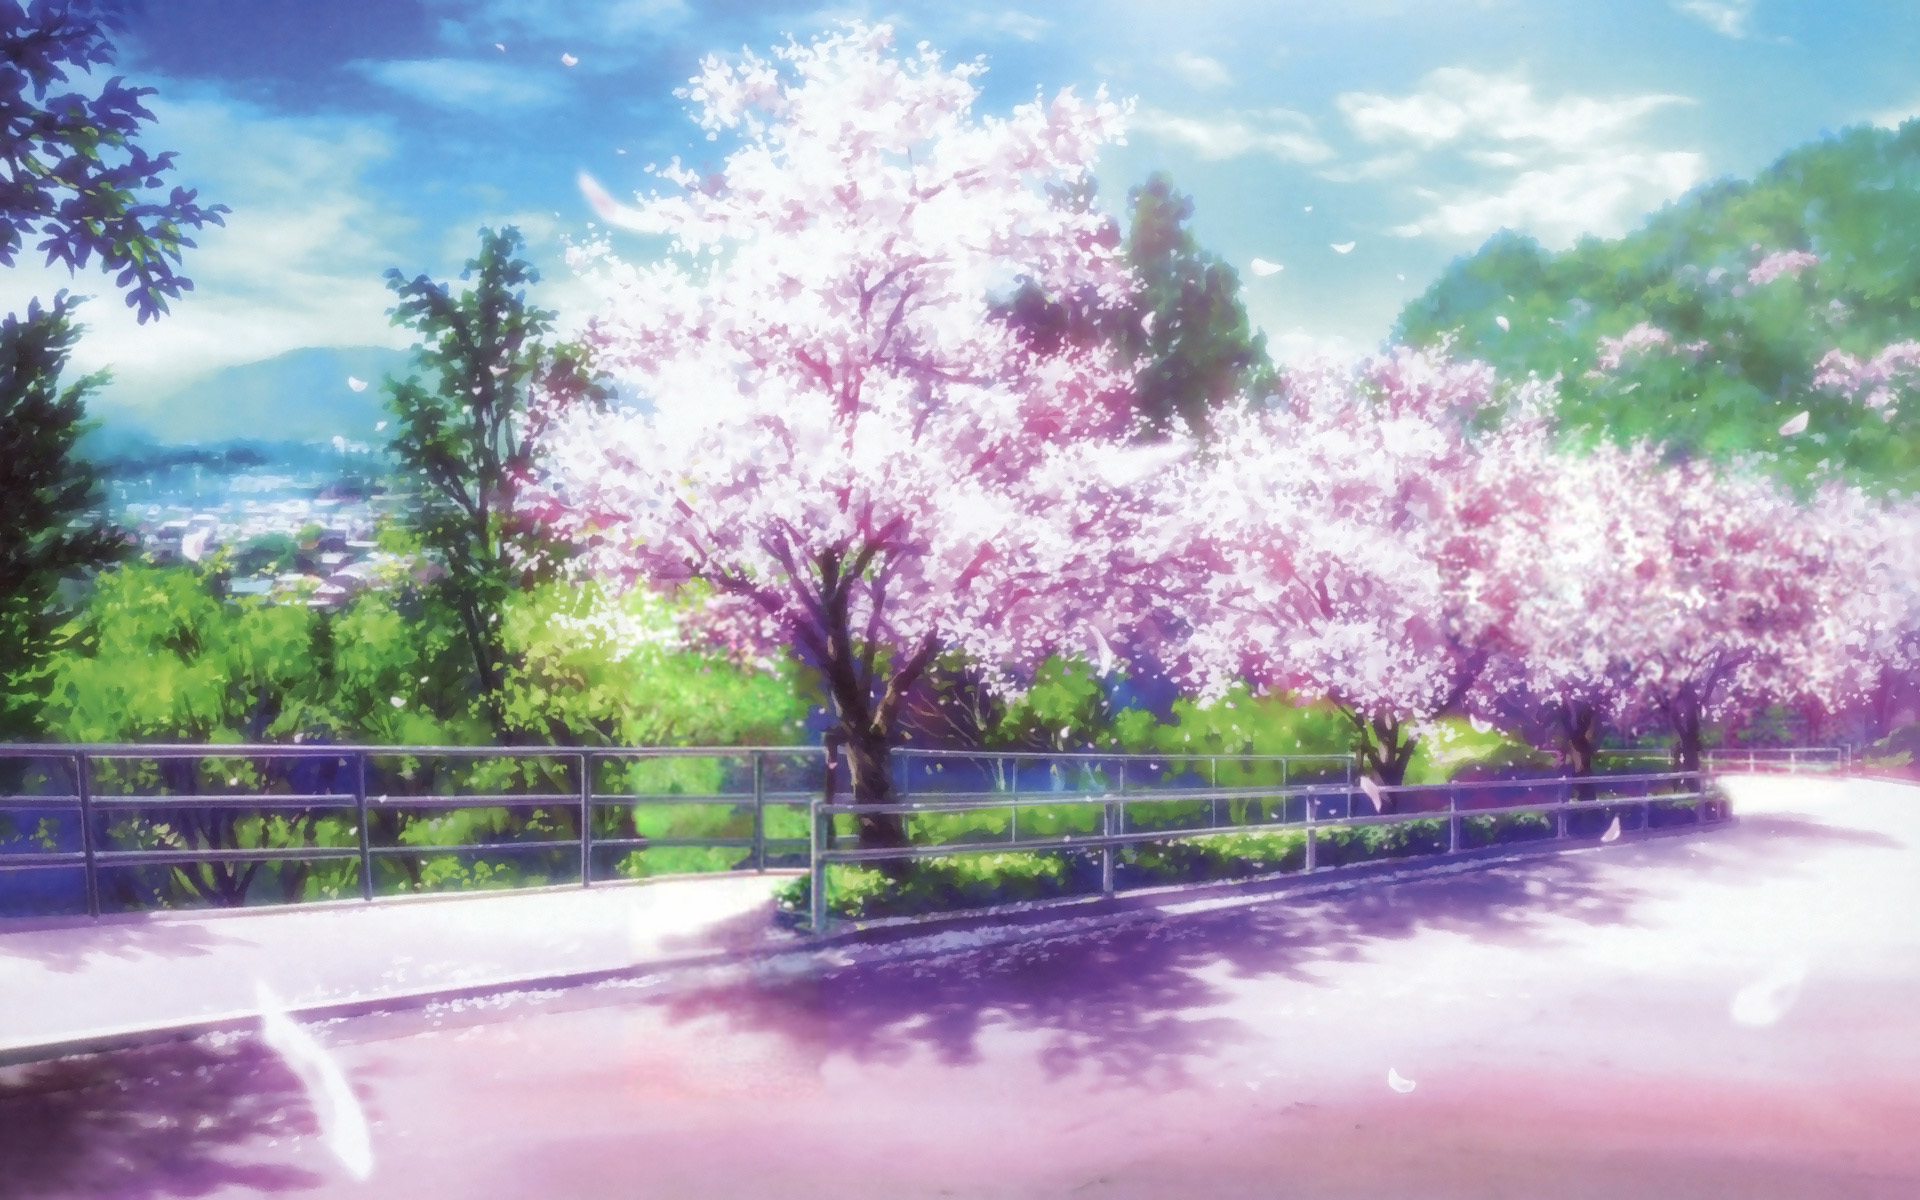 Anime Girl Cherry Blossom Season 5k HD Anime 4k Wallpapers Images  Backgrounds Photos and Pictures